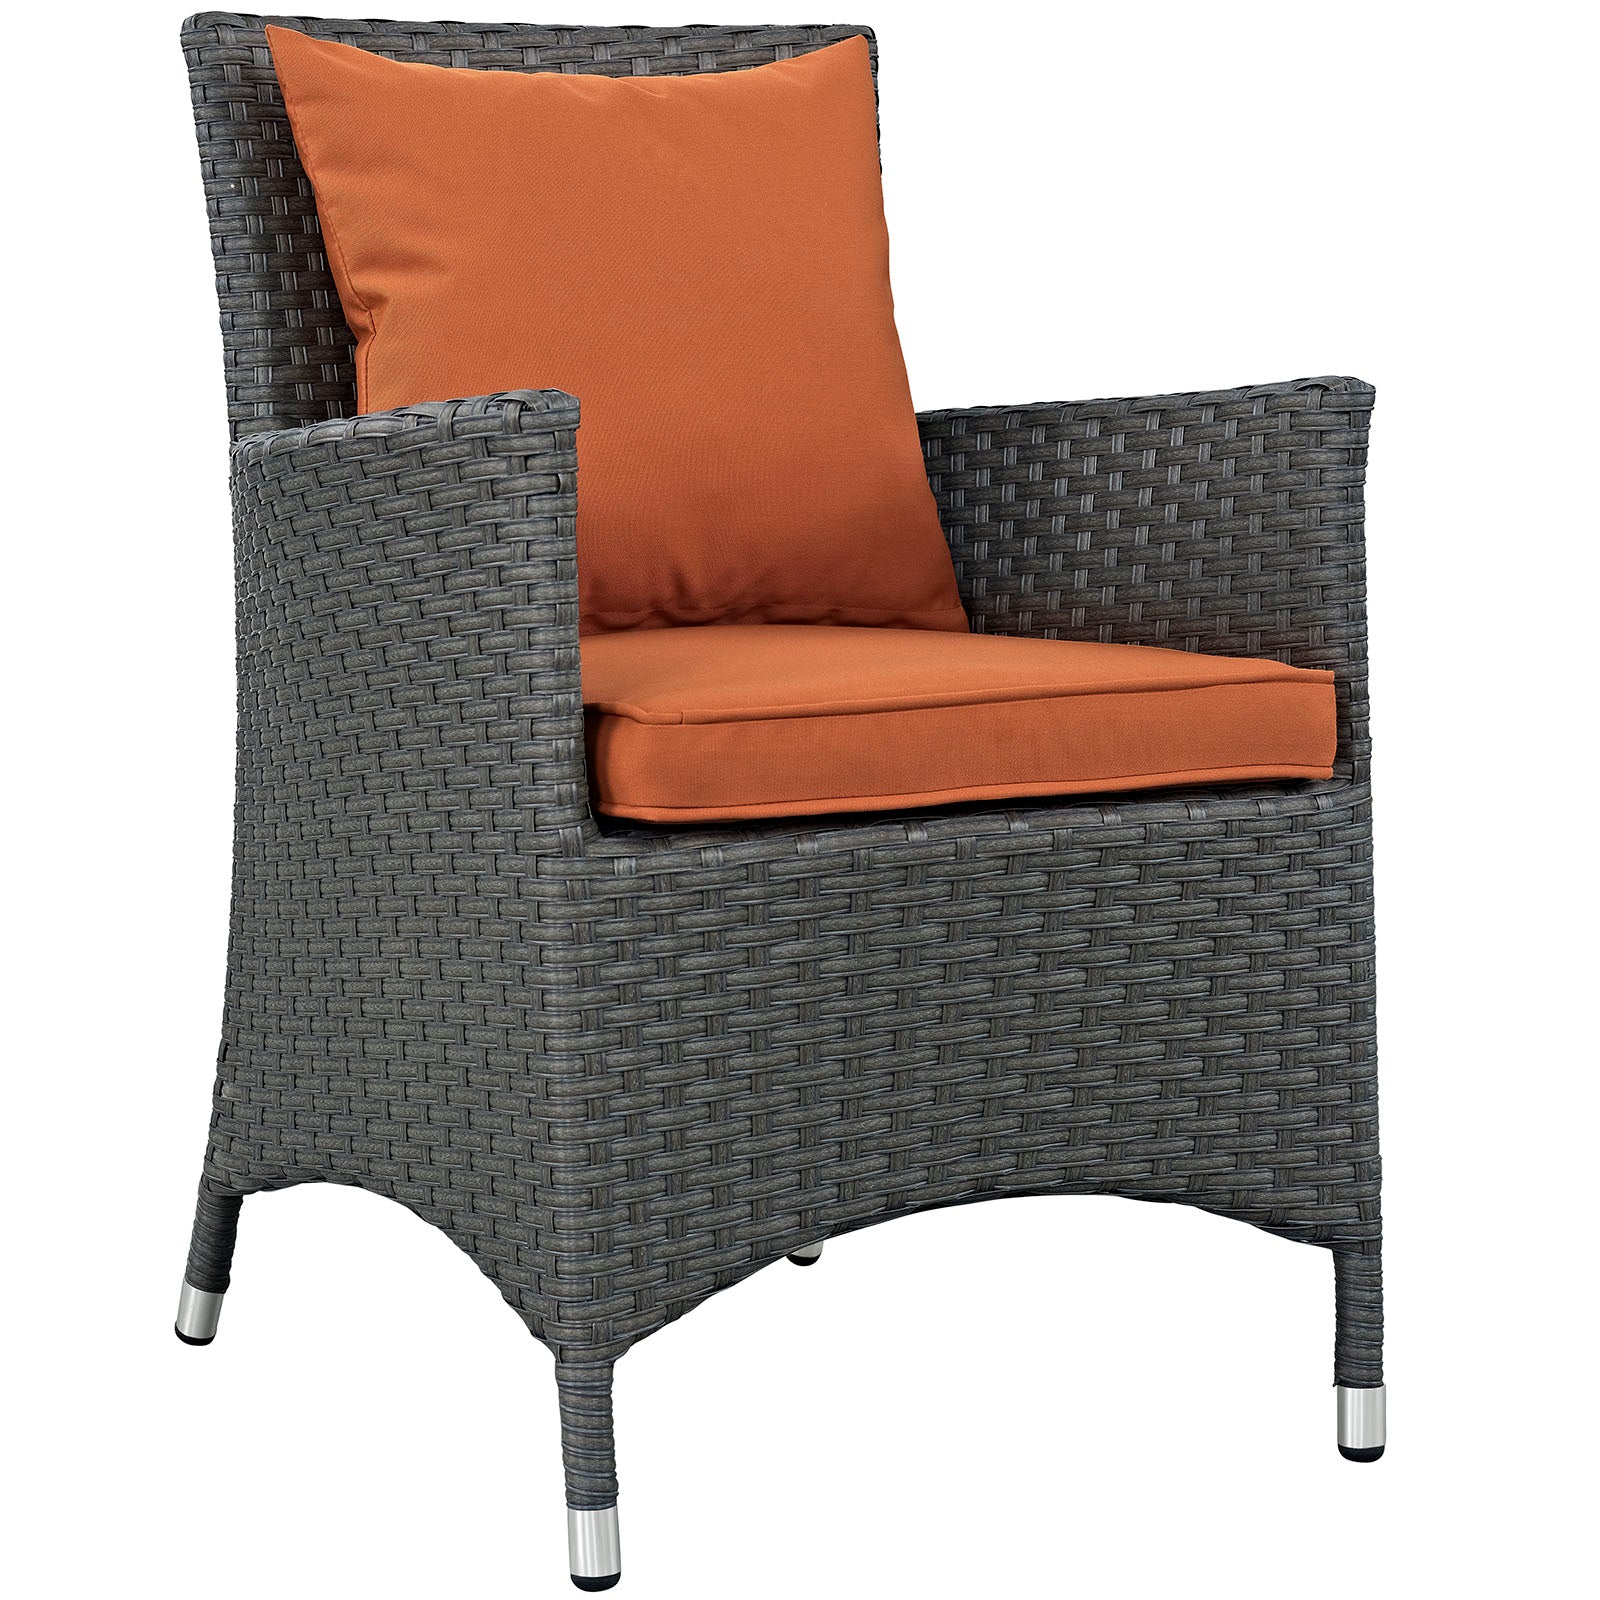 Modway Outdoor Dining Chairs - Sojourn Dining Outdoor Patio Sunbrella Armchair Canvas Tuscan